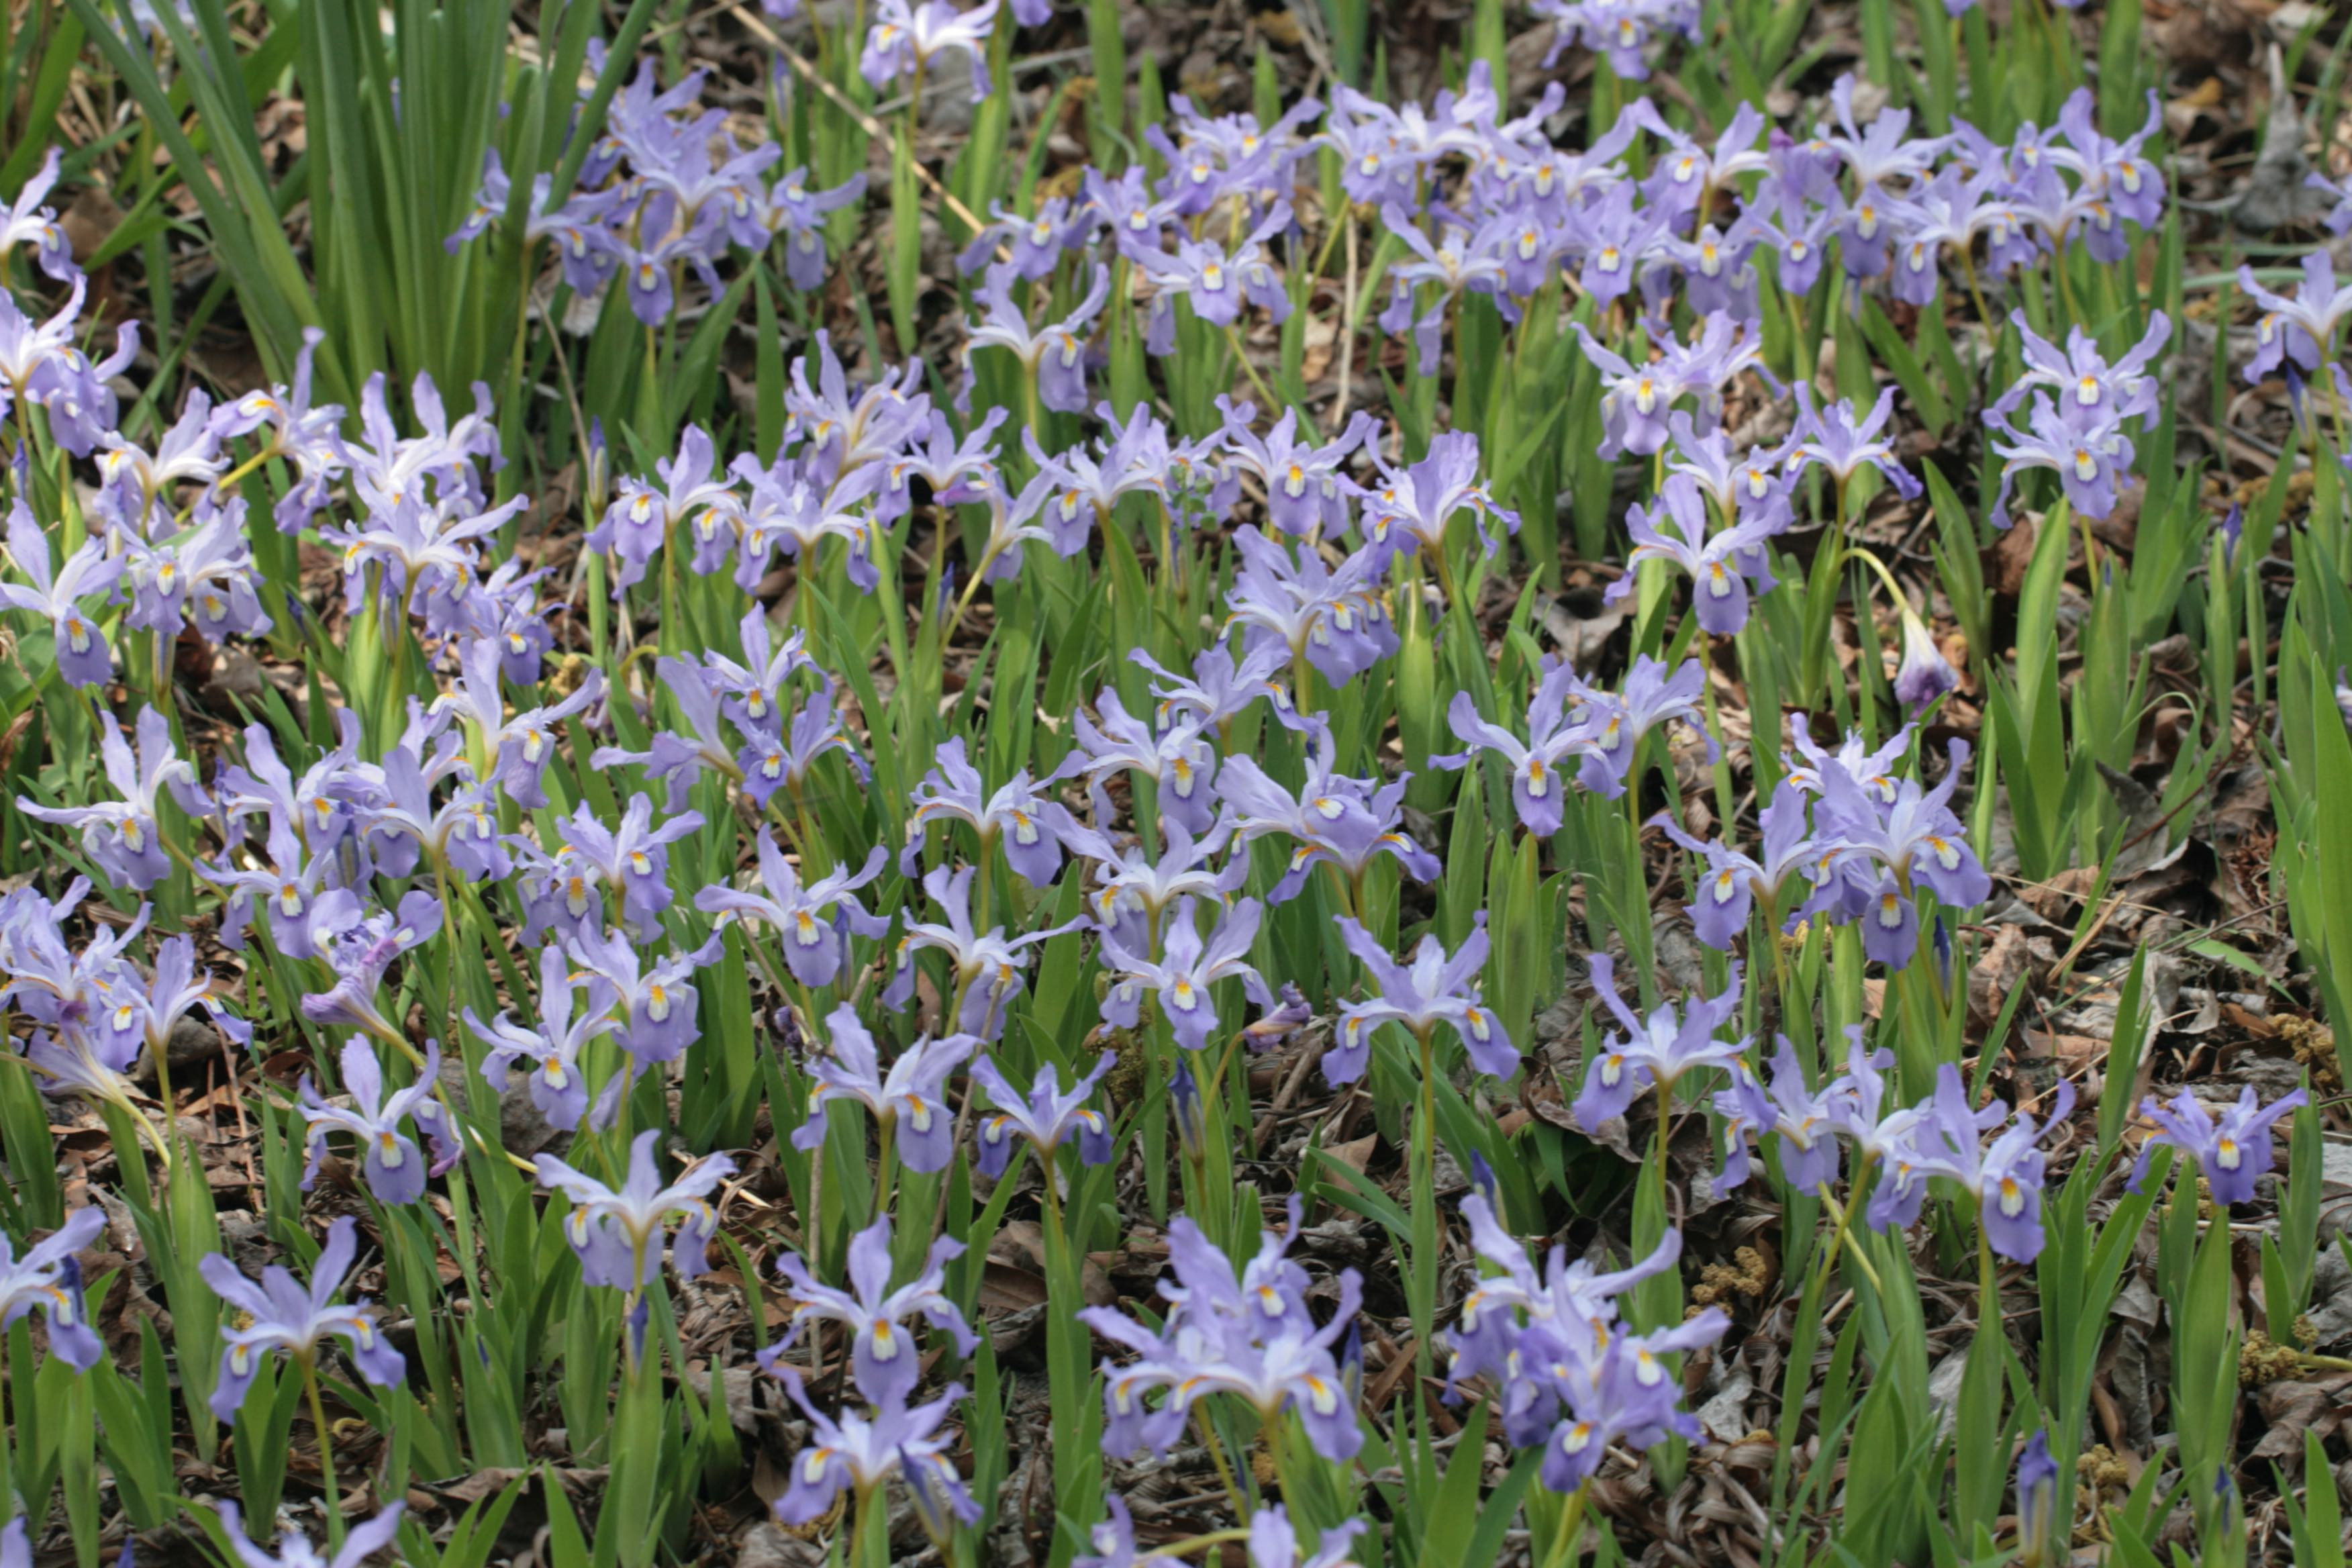 The Scientific Name is Iris cristata. You will likely hear them called Dwarf Crested Iris. This picture shows the A large grouping makes for a spectacular sight in the garden. of Iris cristata